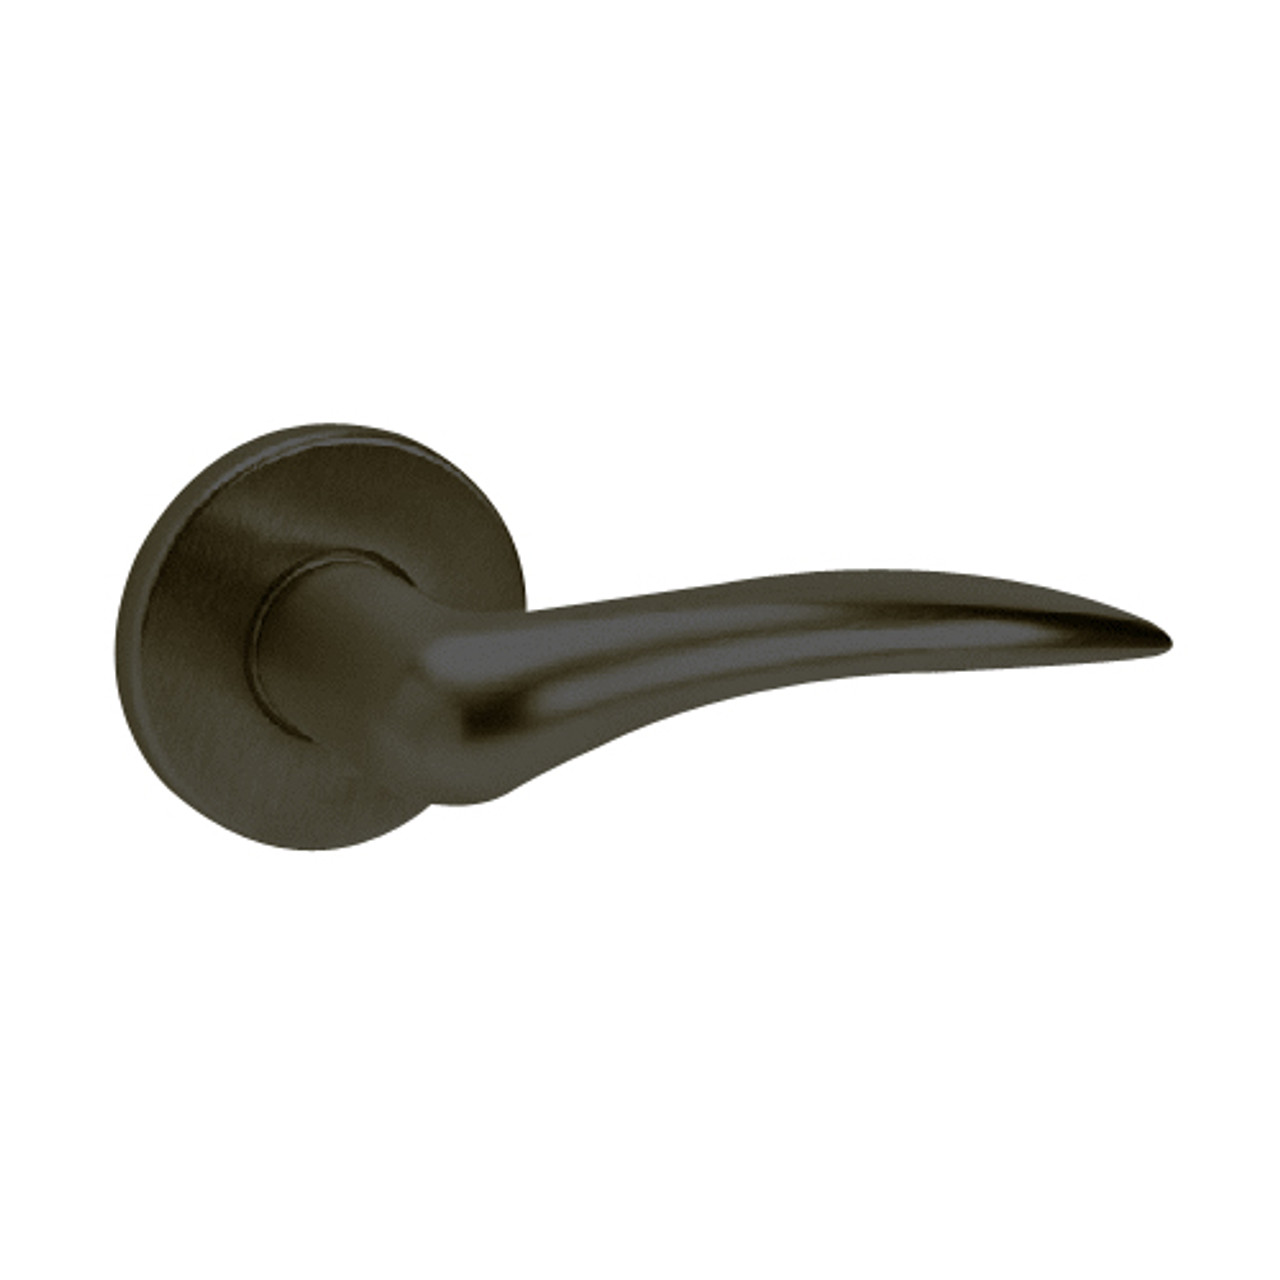 ML2052-DSA-613-CL7-LH Corbin Russwin ML2000 Series IC 7-Pin Less Core Mortise Classroom Intruder Locksets with Dirke Lever in Oil Rubbed Bronze